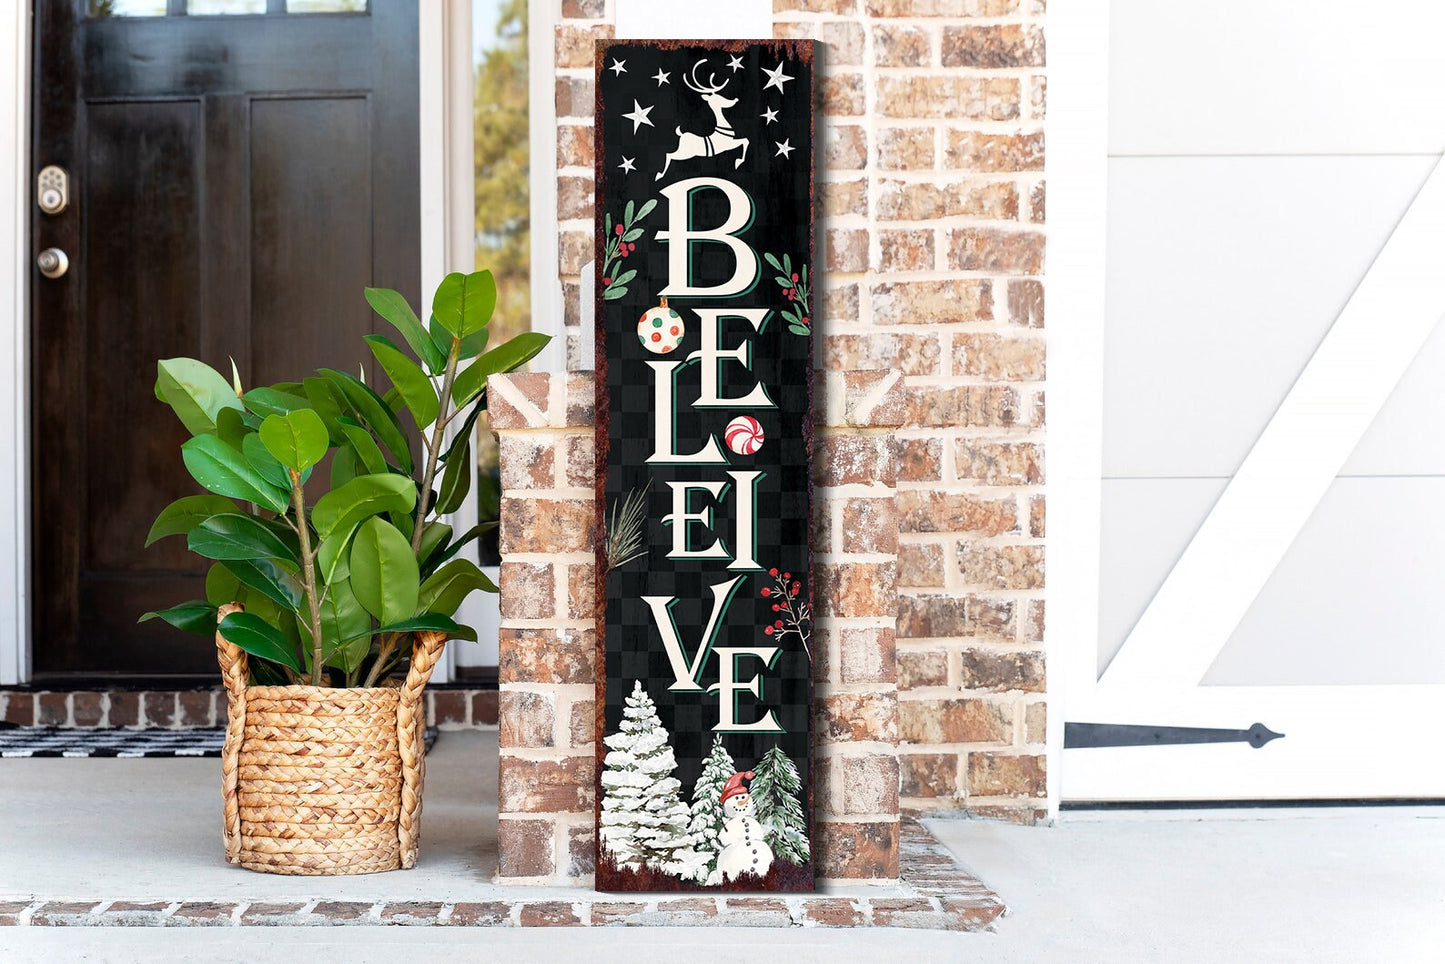 36in Believe Christmas Sign for Front Porch - Vintage Christmas Decoration, Rustic Modern Farmhouse Entryway Snowman Decor for Front Door